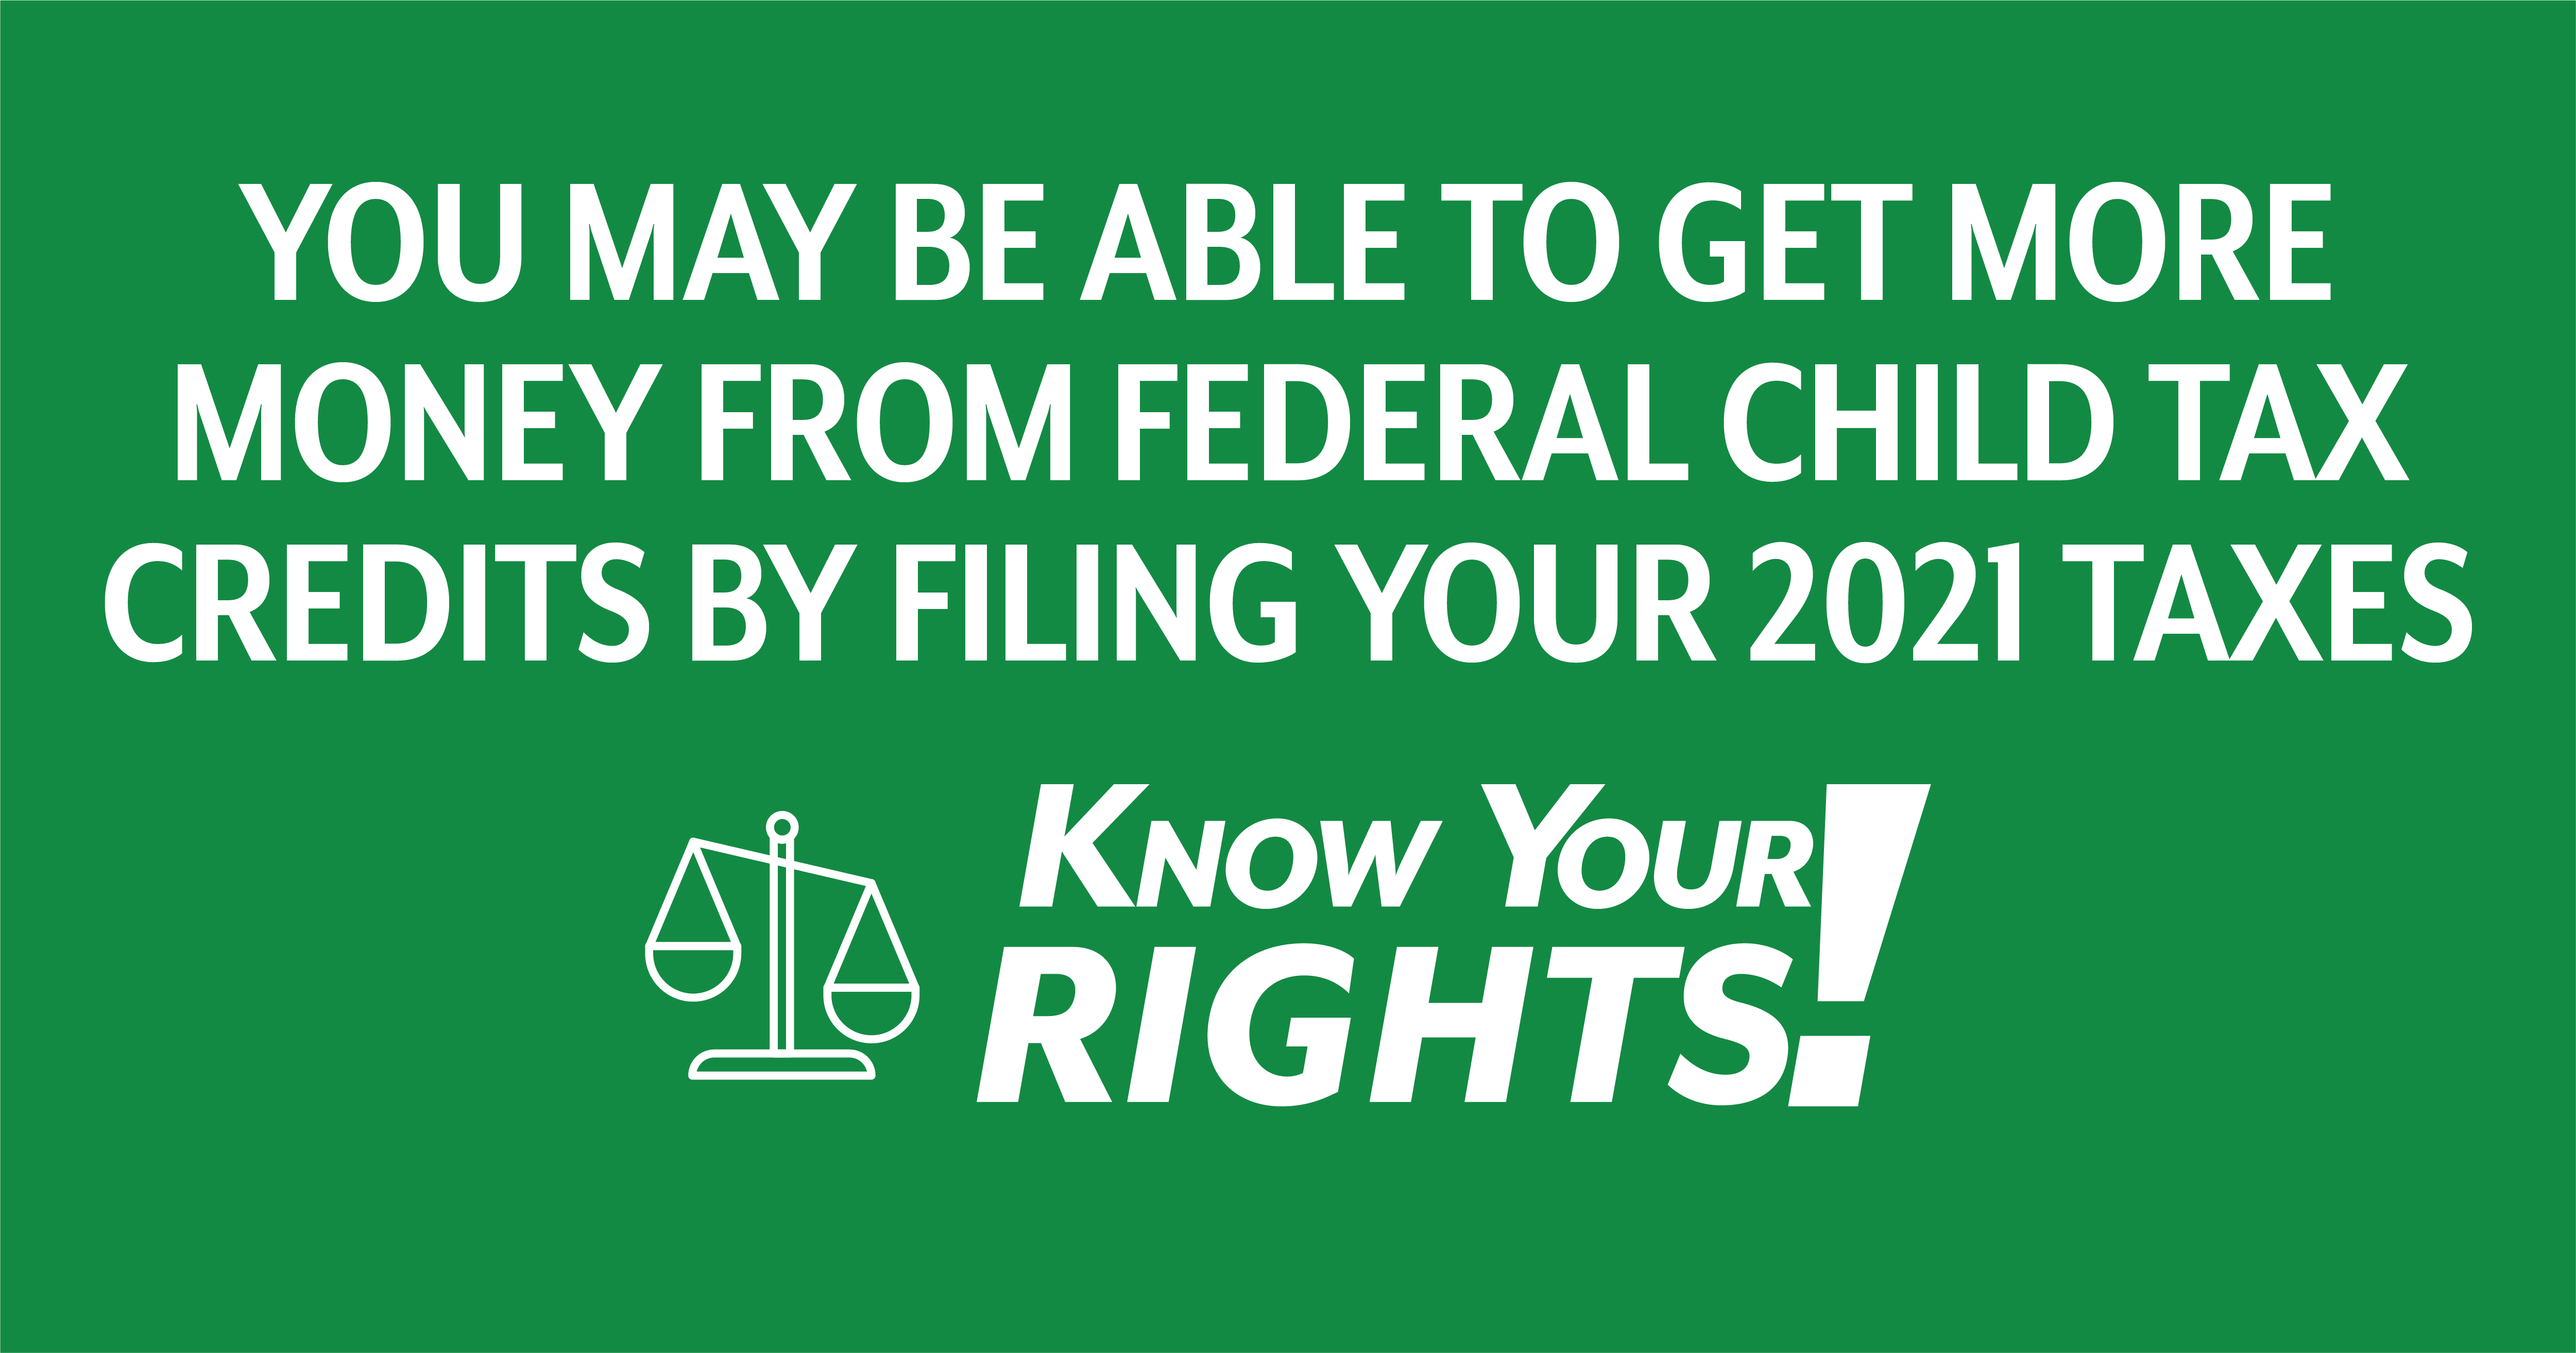 you-may-be-able-to-get-more-money-from-federal-child-tax-credits-by-filing-your-2021-taxes-slls